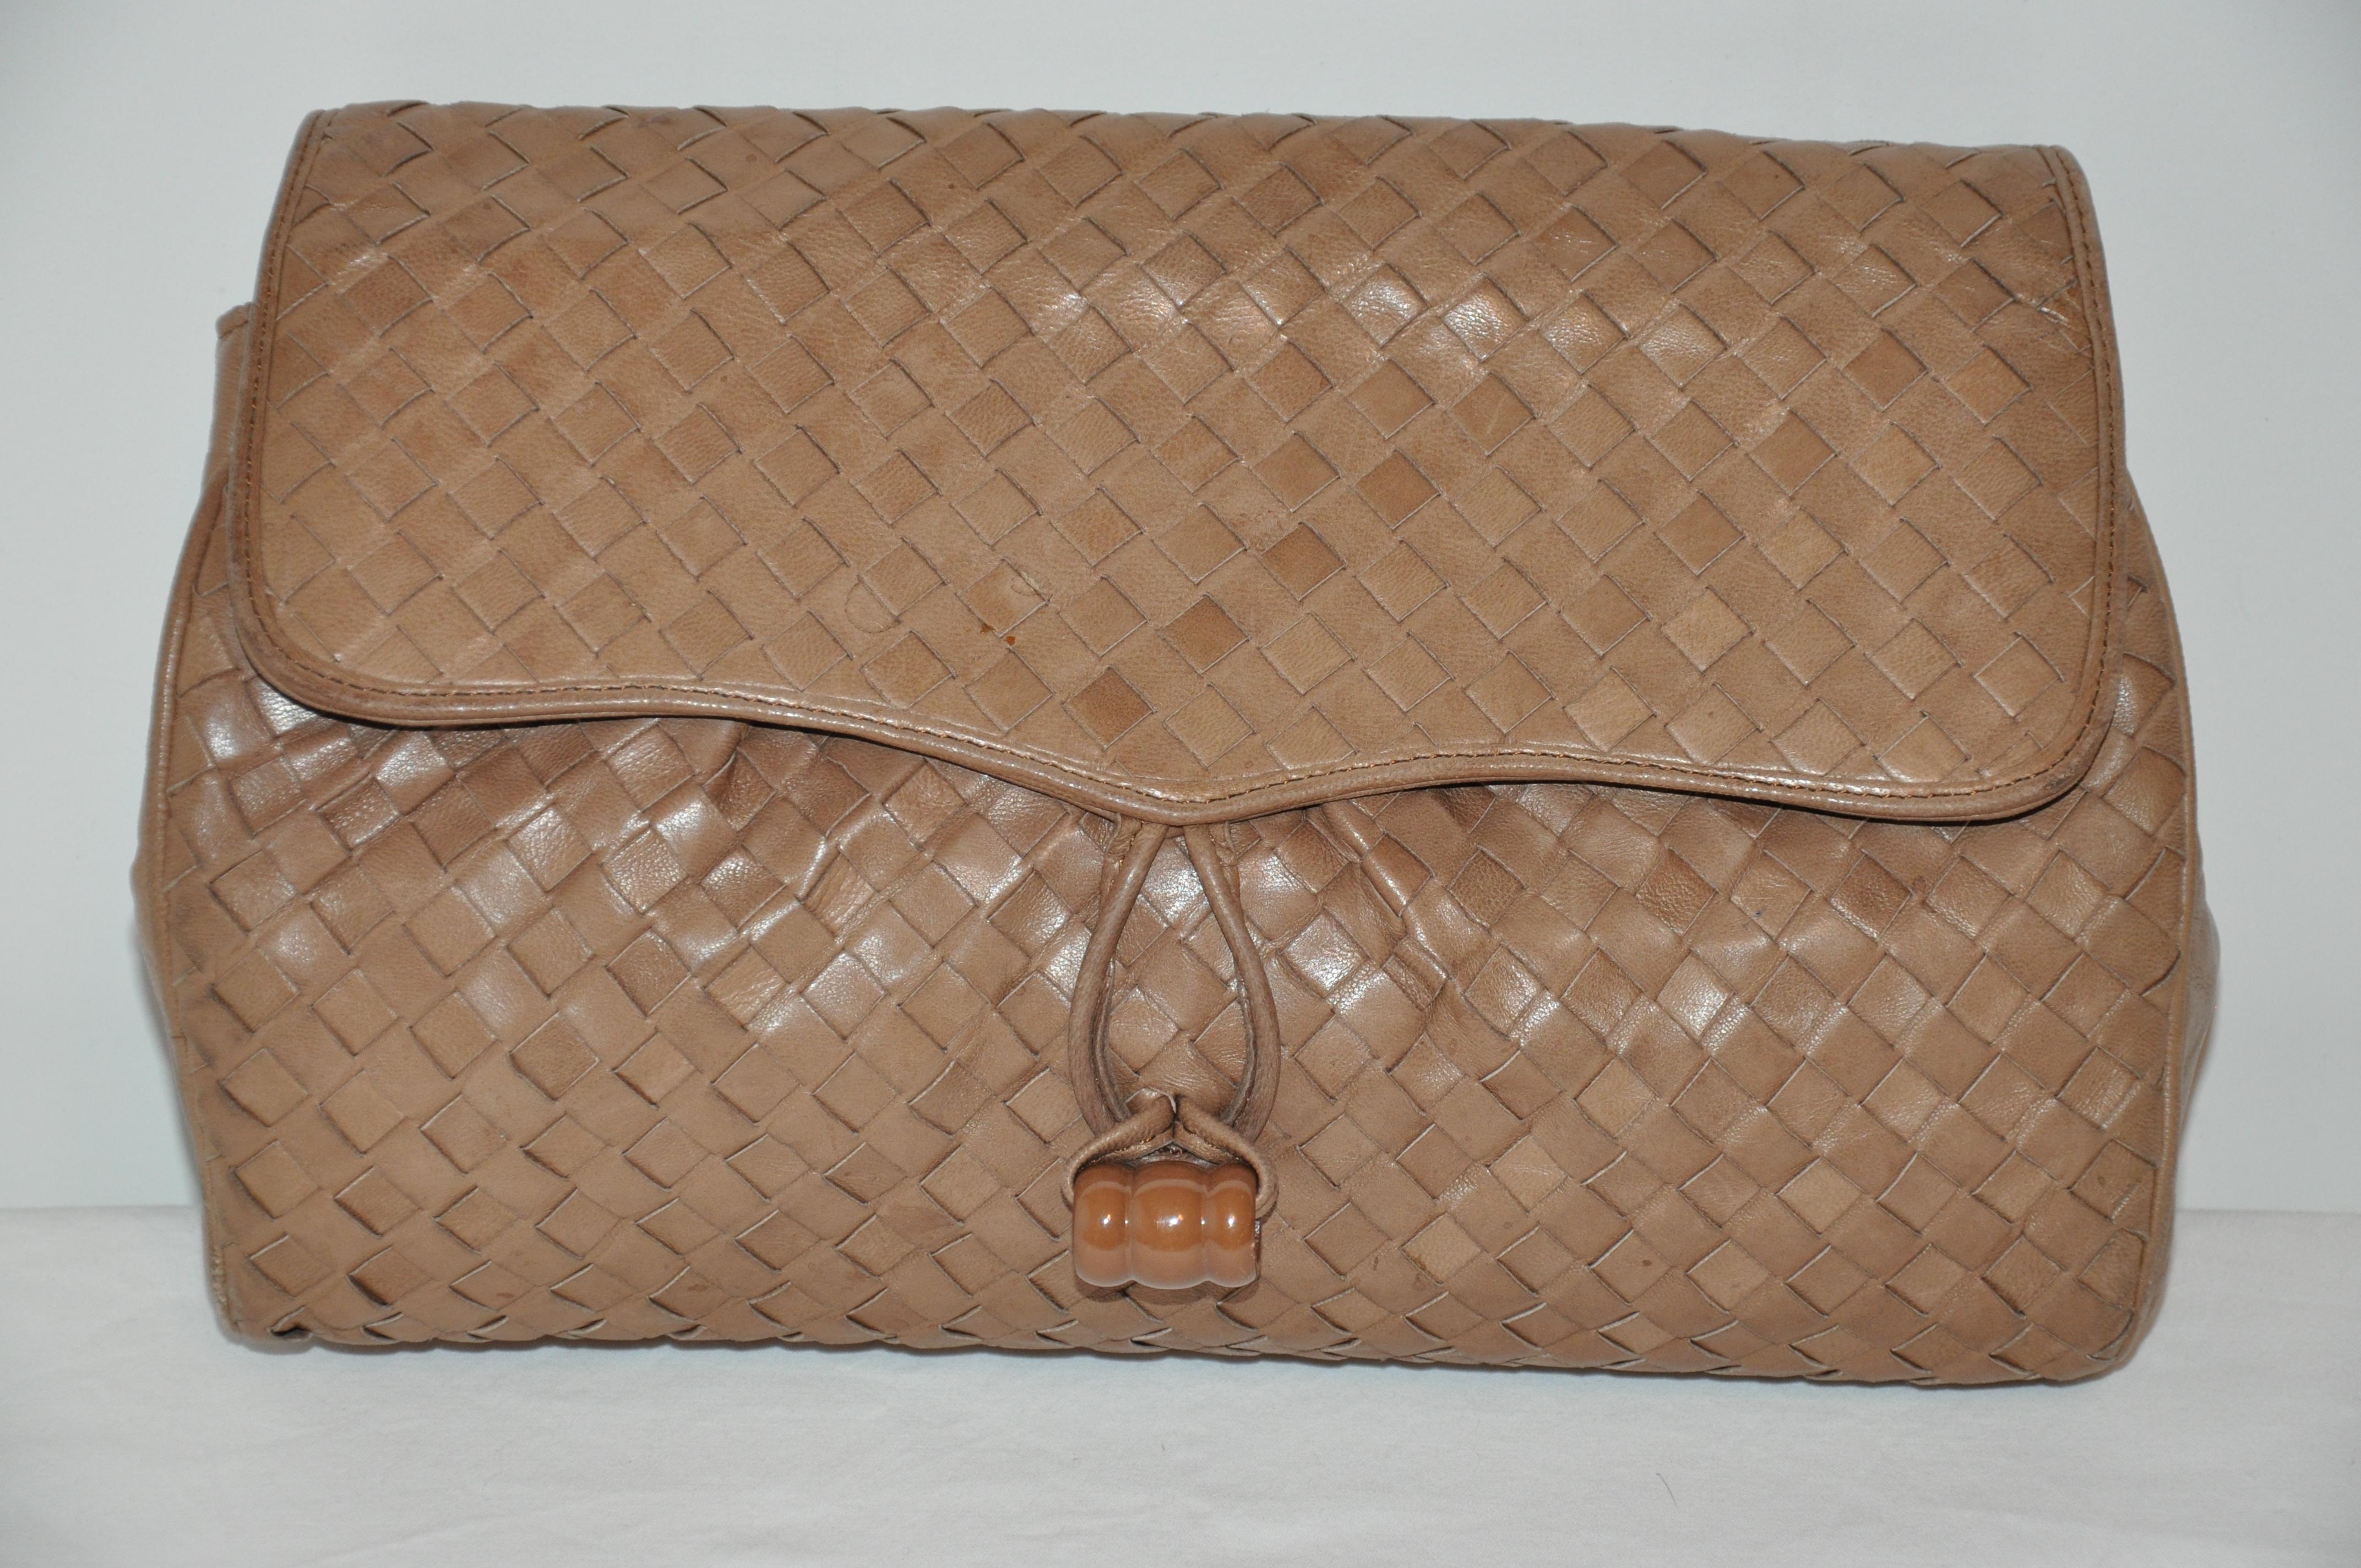      Wonderfully butter soft, this taupe woven lambskin optional clutch or shoulder bag has a taupe lucite 